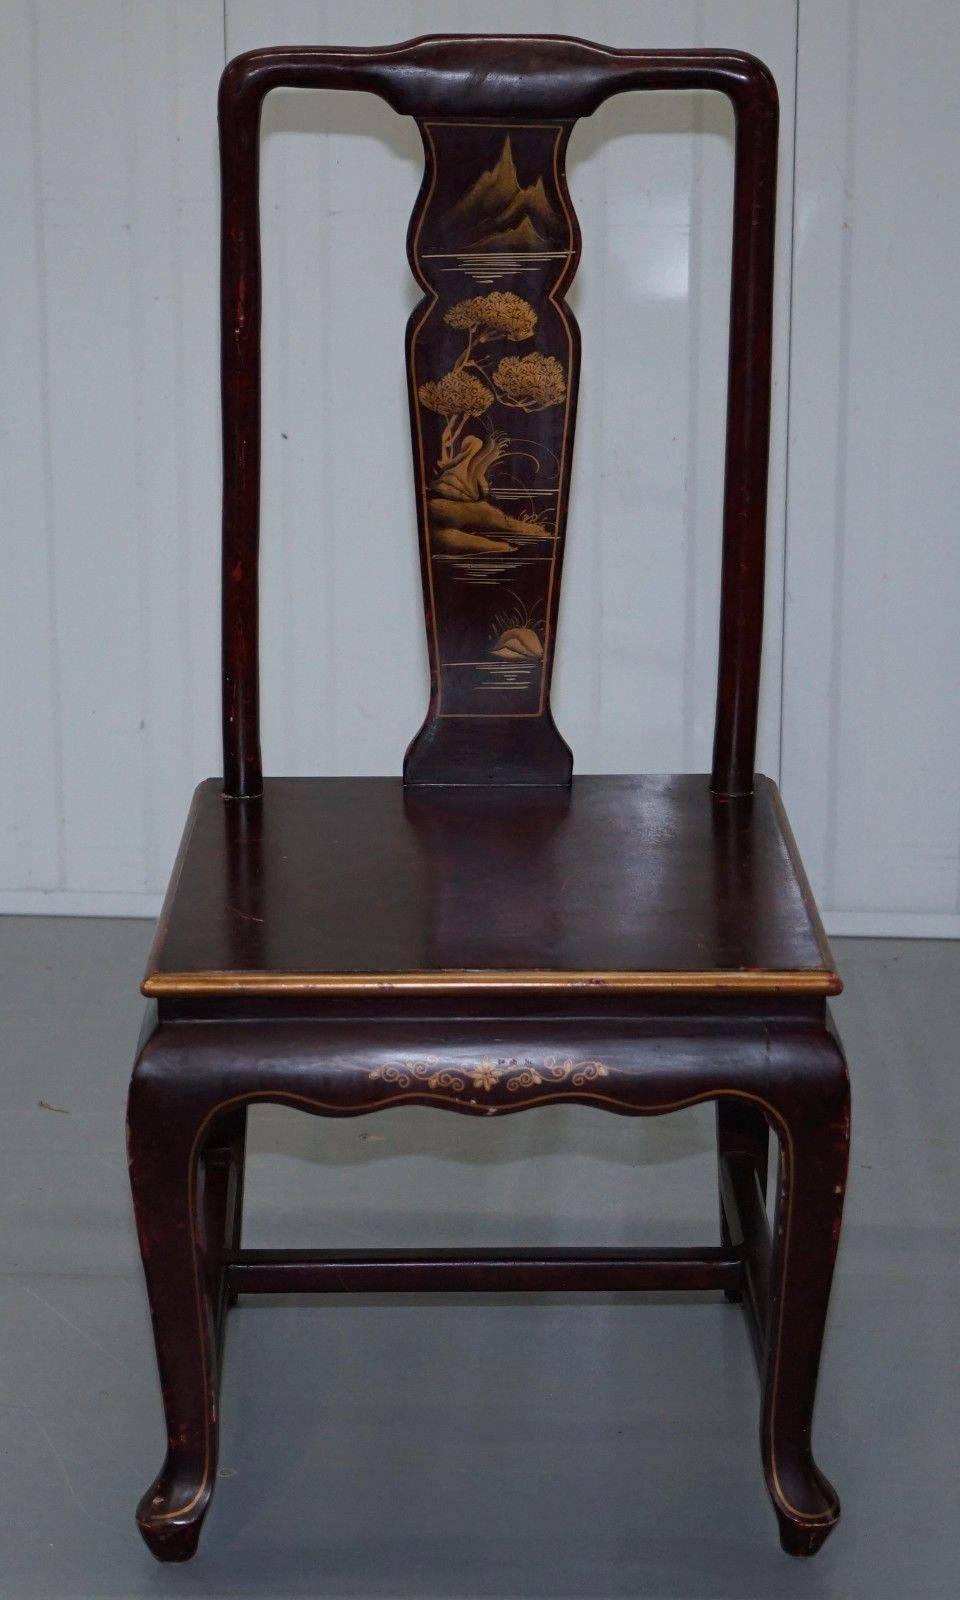 We are delighted to offer for sale this lovely very rare antique reddish lacquered Chinese chair

The tradition was for the bride to be carried on this chair to grooms house where her feet were bound 

This piece is in excellent condition